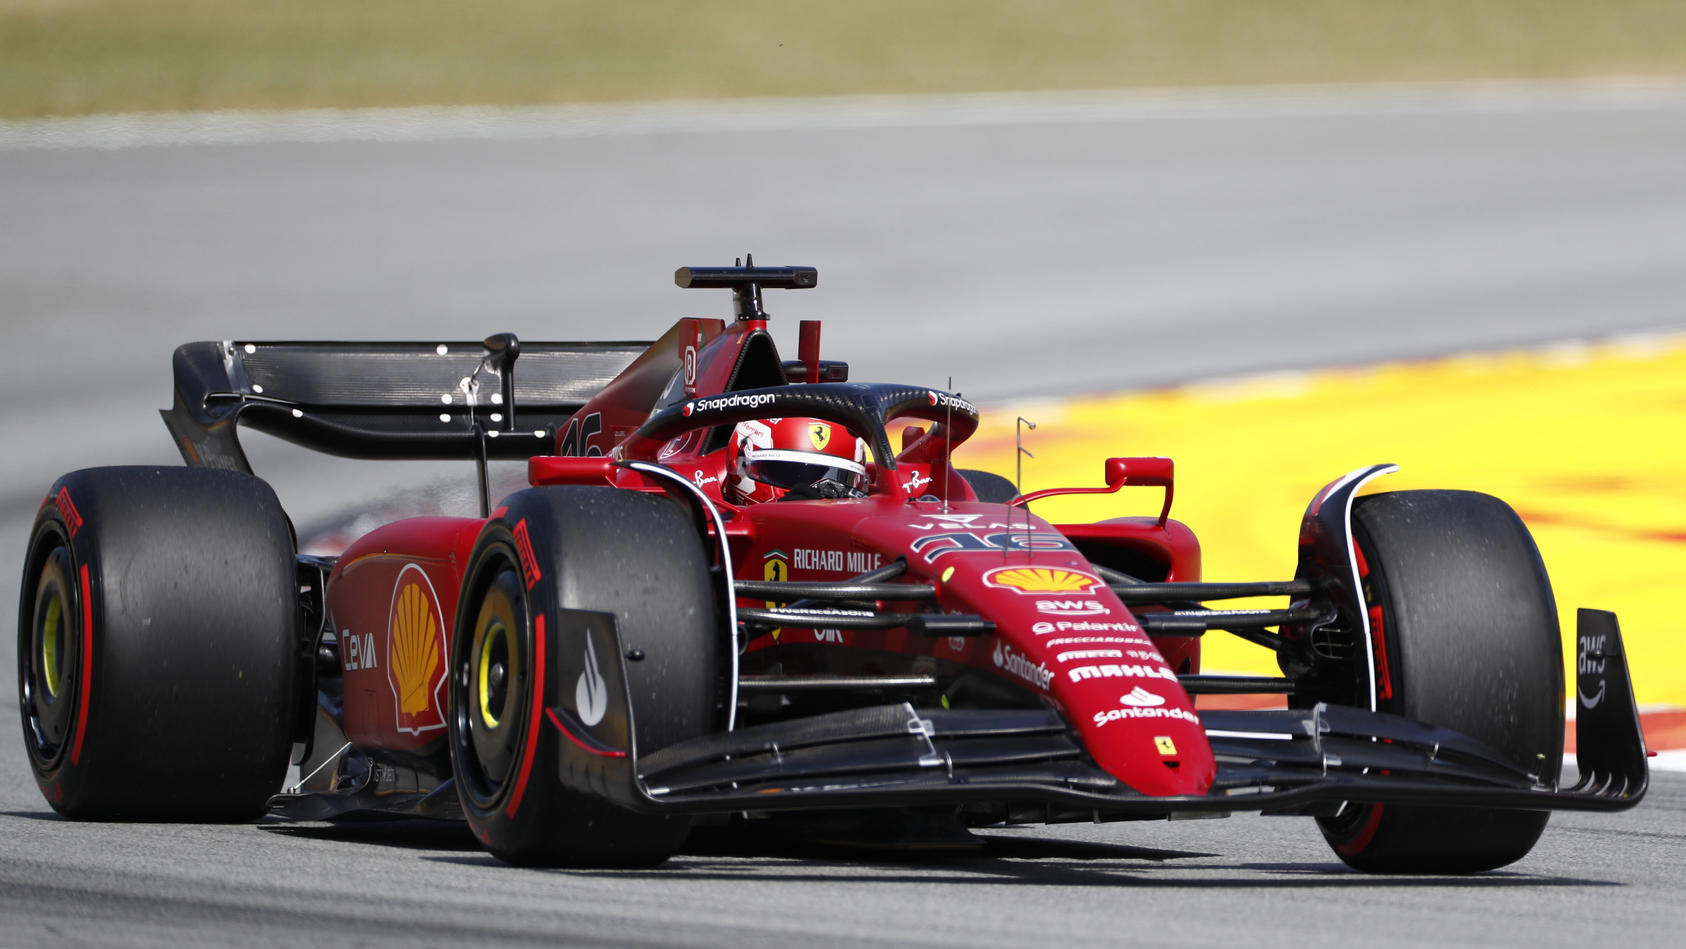 Ferrari driver Charles Leclerc of Monaco steers his car during qualifying session at the Barcelona Catalunya racetrack in Montmelo, Spain, Saturday, May 21, 2022. The Formula One race will be held on Sunday. (AP Photo/Joan Monfort)